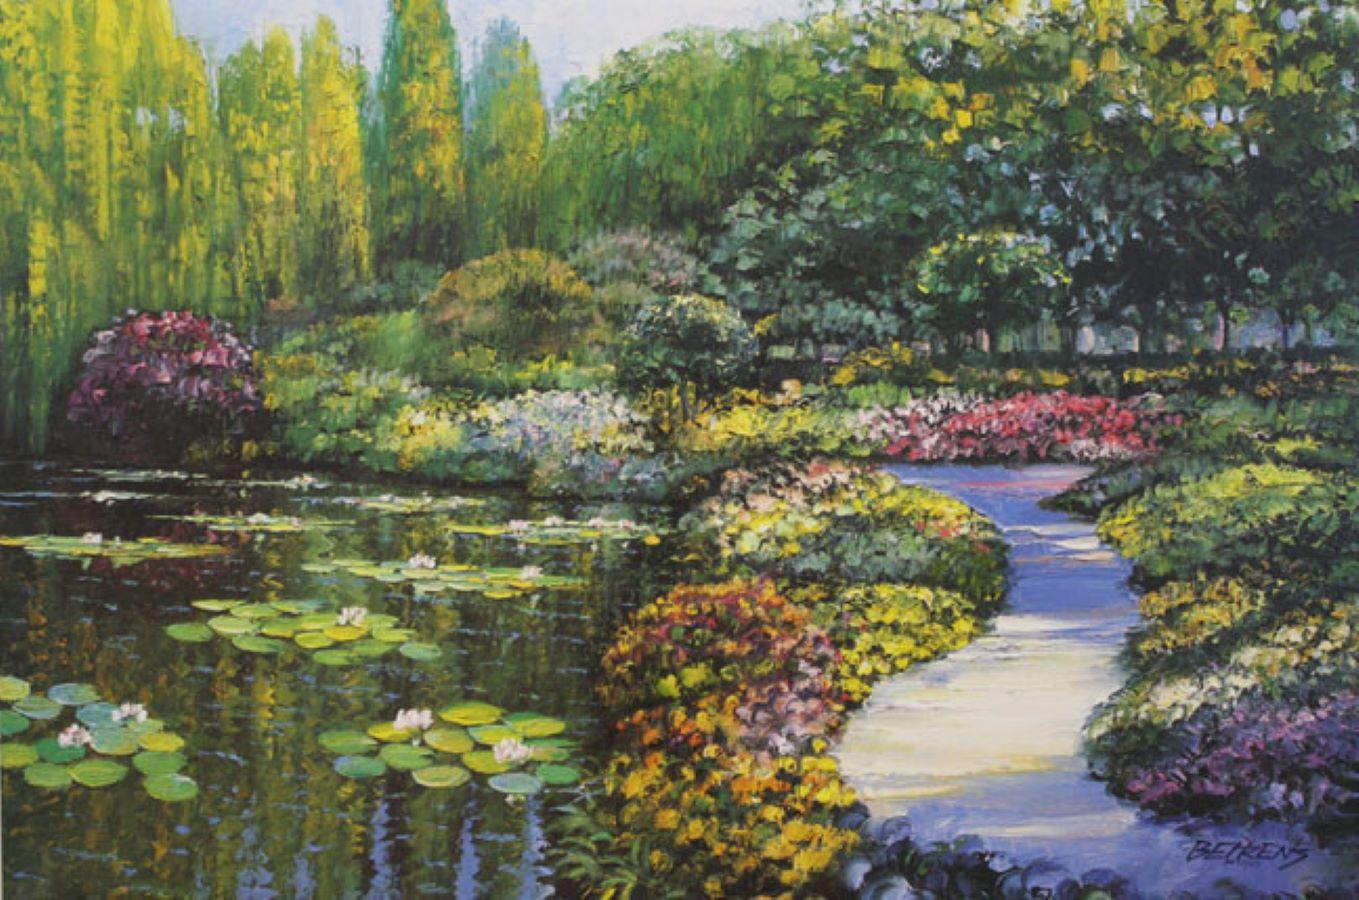 Howard Behrens Landscape Print - Monet's Garden-L. E. Embellished Giclee on Canvas. Signed, comes with COA